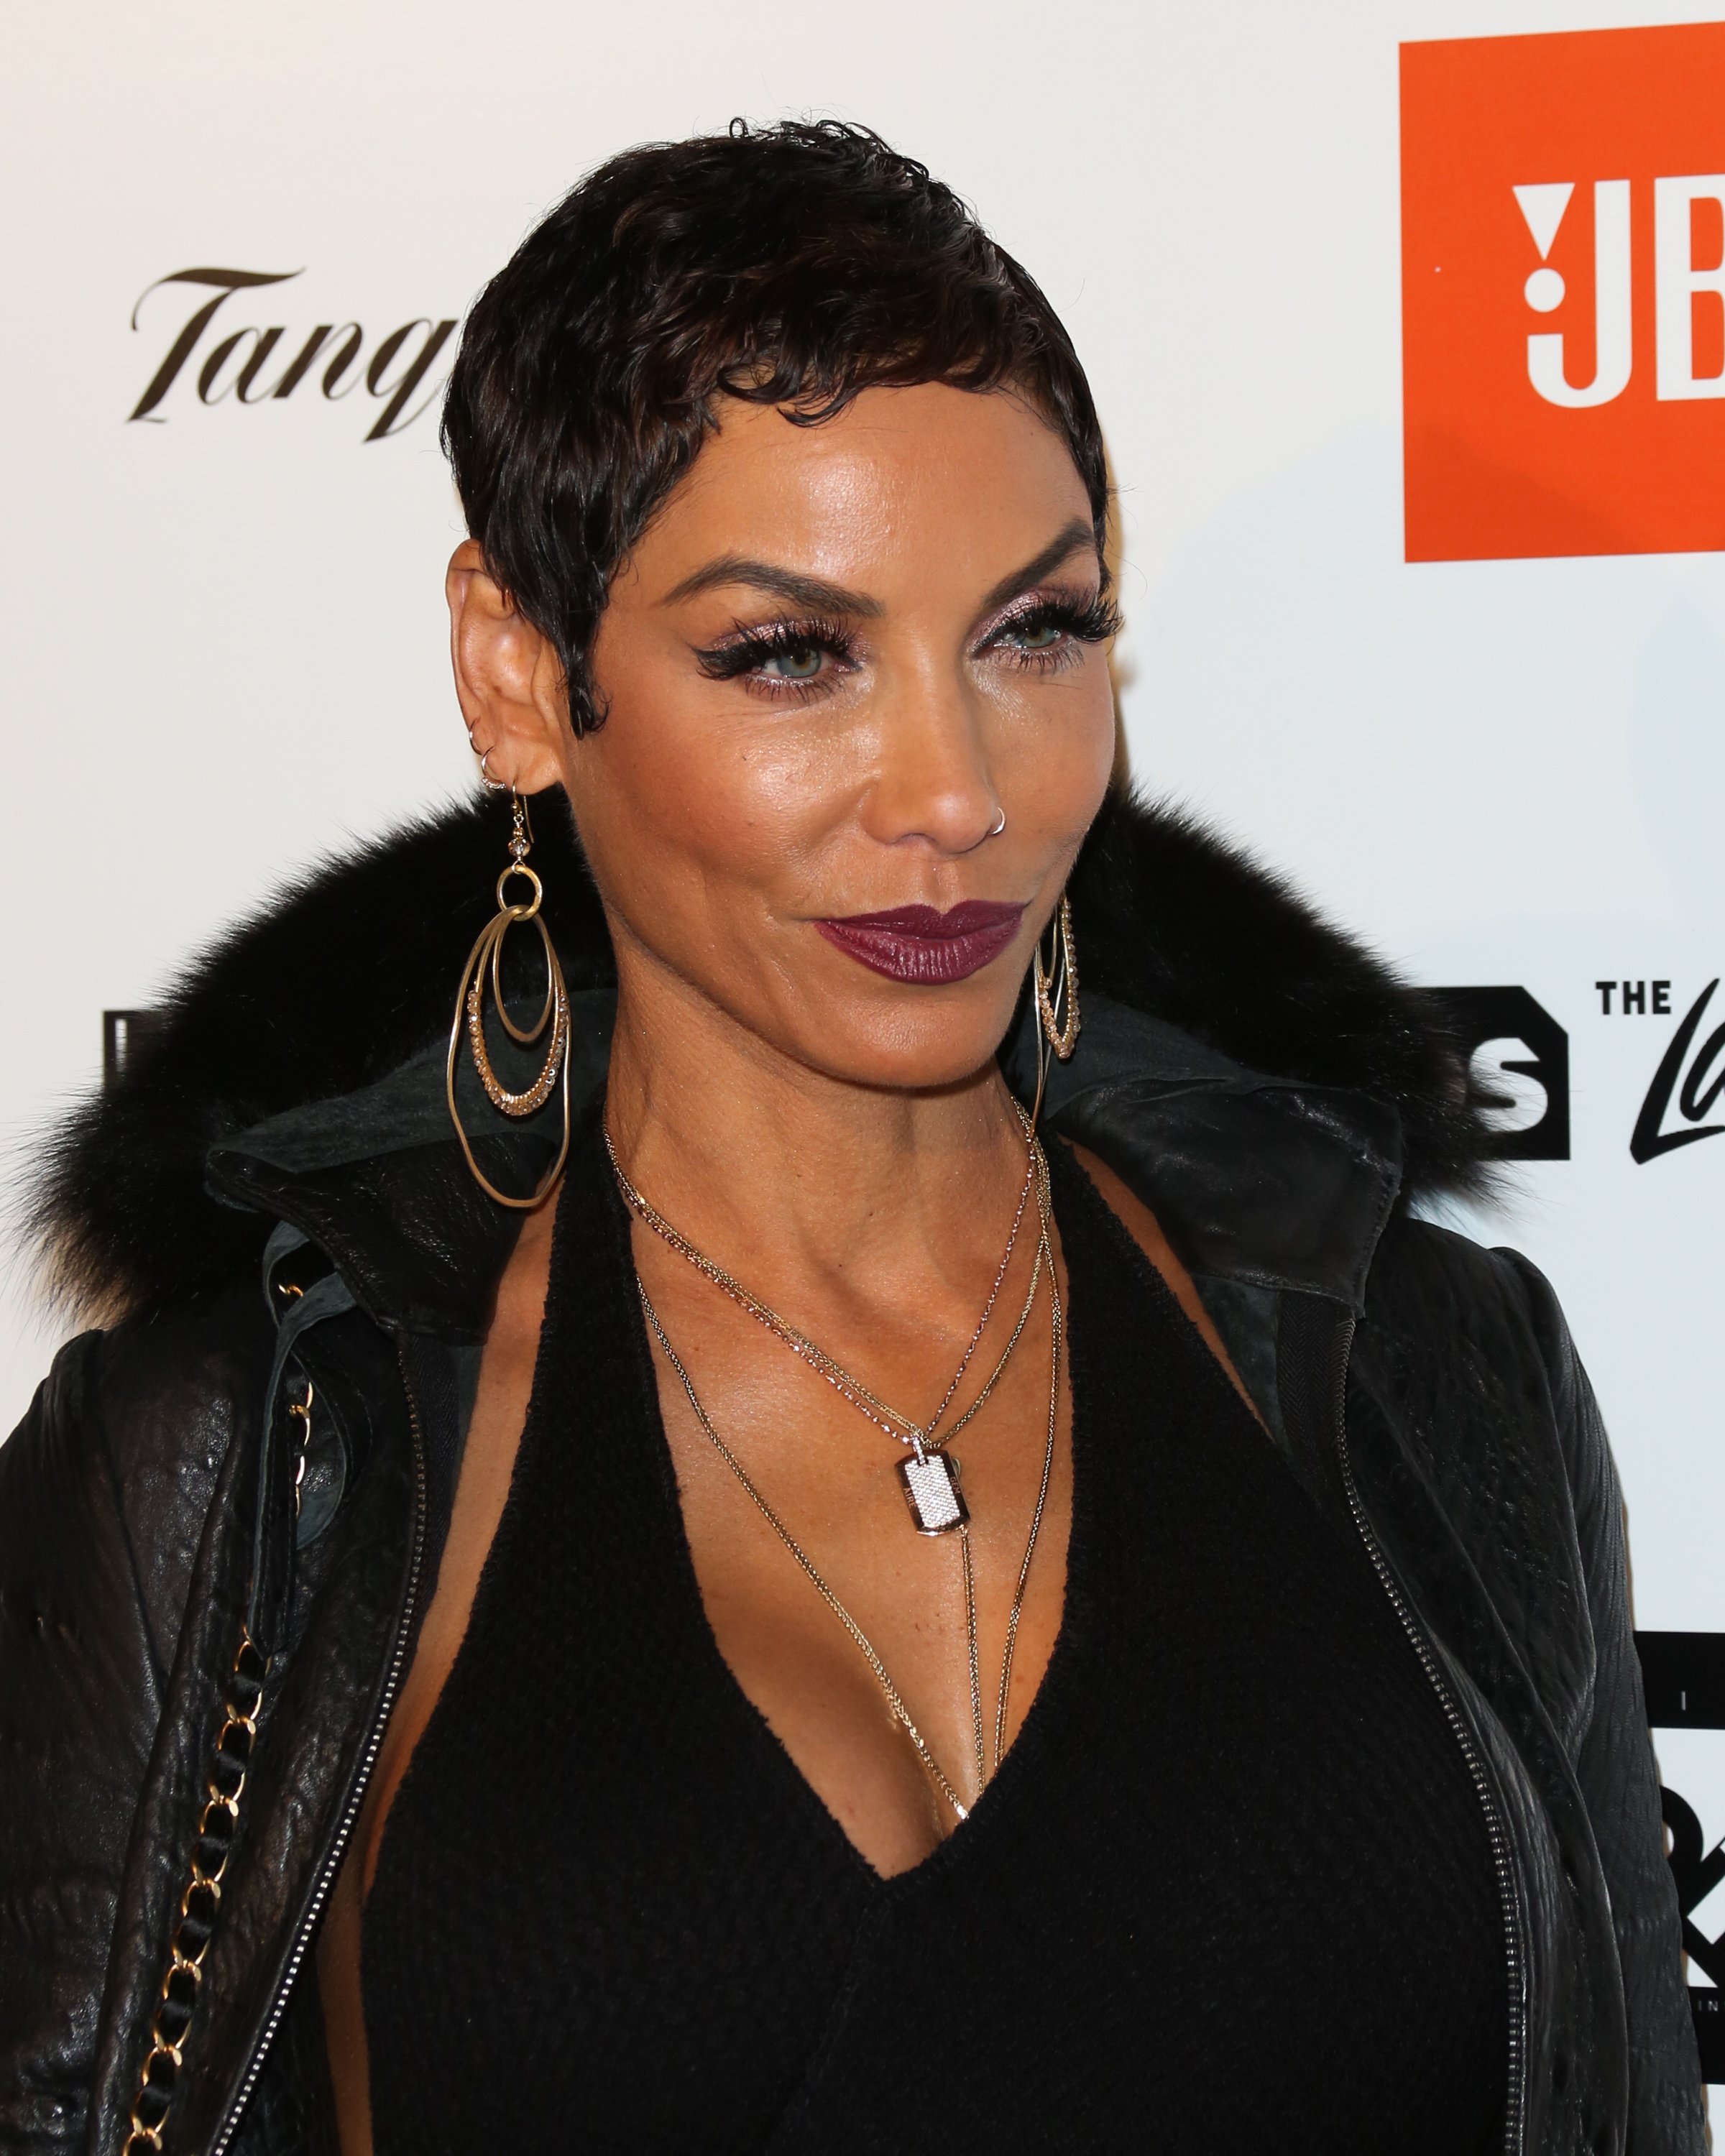 Nicole Murphy at Kenny 'The Jet' Smith's annual All-Star bash on Feb. 16, 2018 in California | Photo: Getty Images